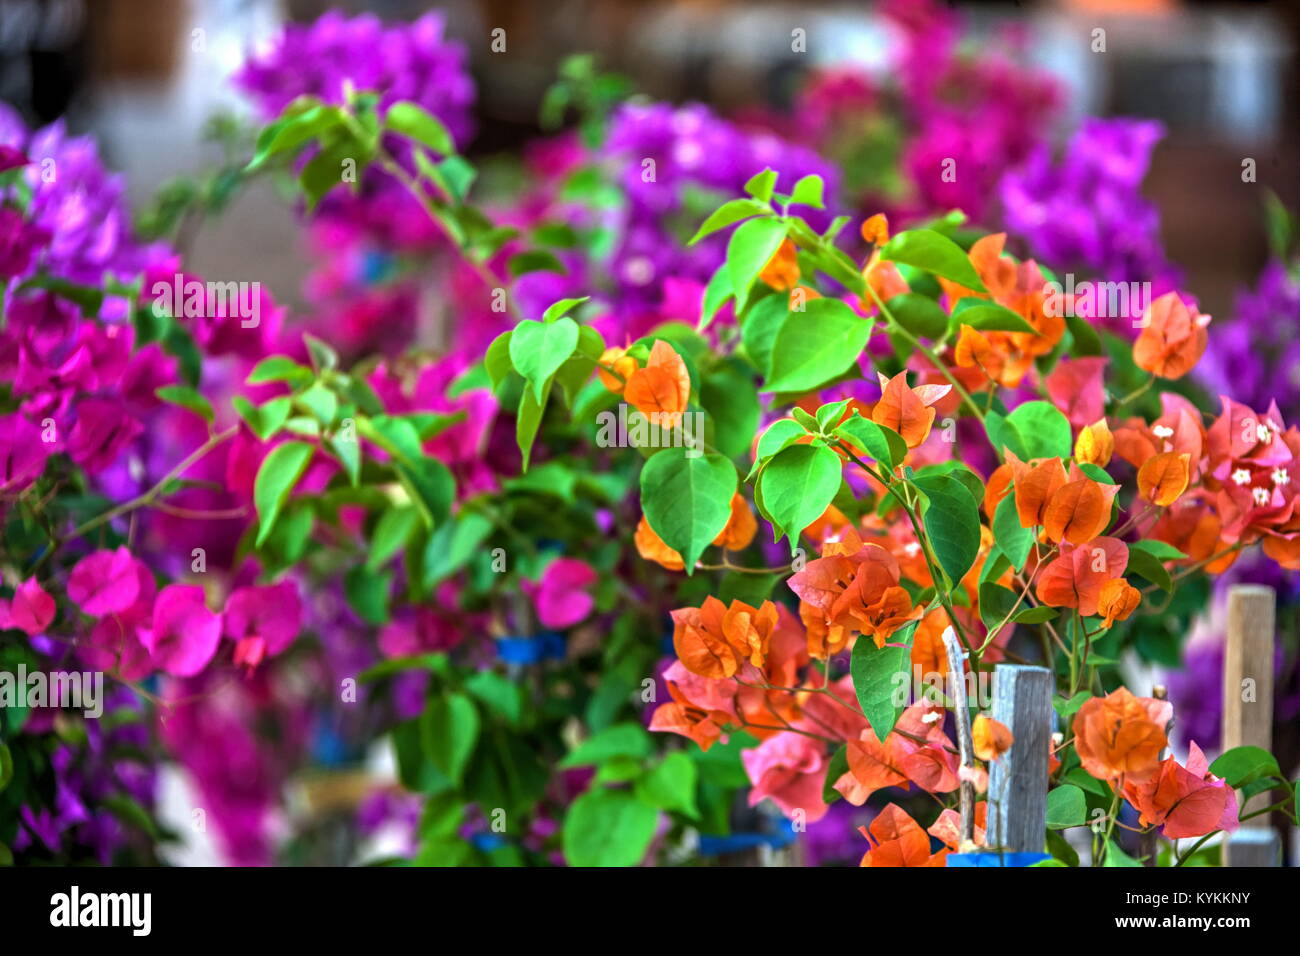 Bougainvillea is a thorny ornamental vines, bushes, and trees with flower-like spring leaves near its flowers Stock Photo